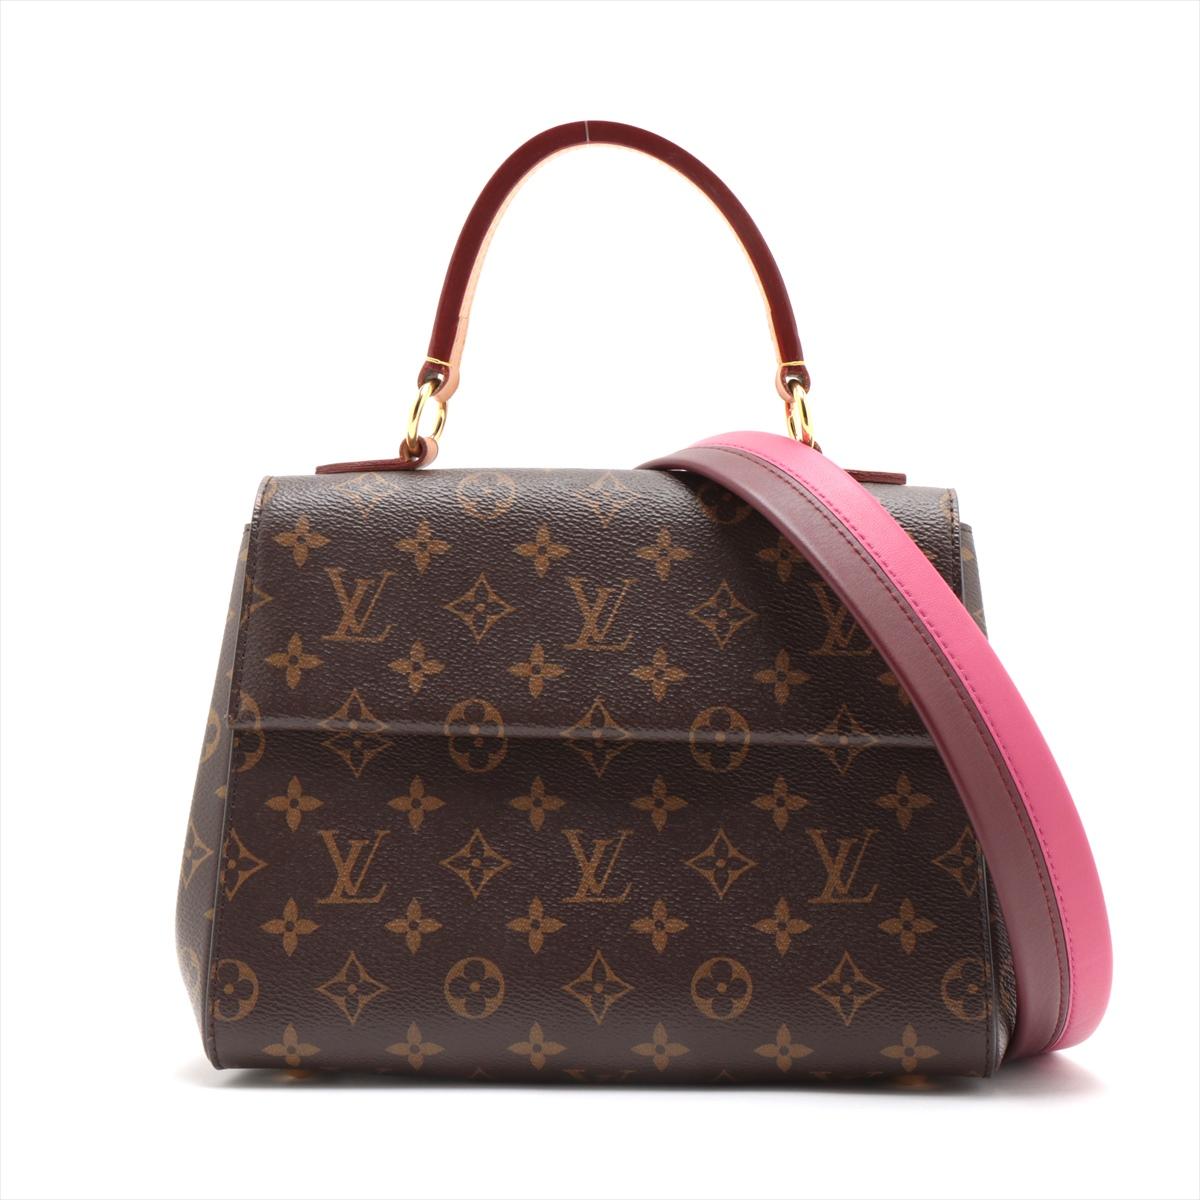 The Louis Vuitton Monogram Cluny BB is a stylish and compact handbag designed for the modern woman. Crafted with the iconic Louis Vuitton Monogram canvas. The bag features a structured silhouette with smooth leather trim. The gold-tone hardware